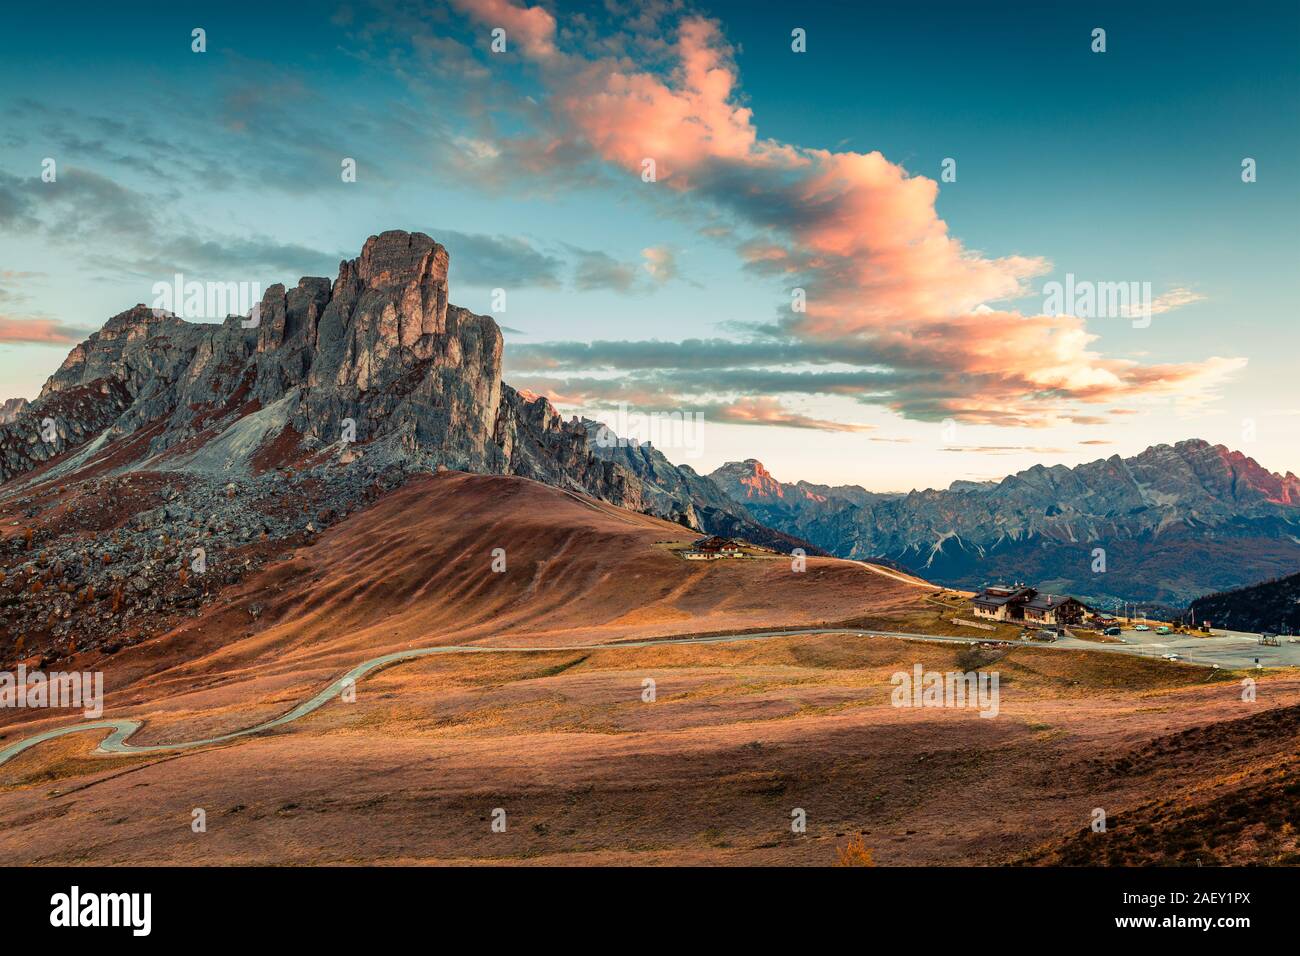 Fantastic morning view from the top of Giau pass with famous Ra Gusela, Nuvolau peaks in background. Colorful autumn sunrise in Dolomite Alps, Italy. Stock Photo